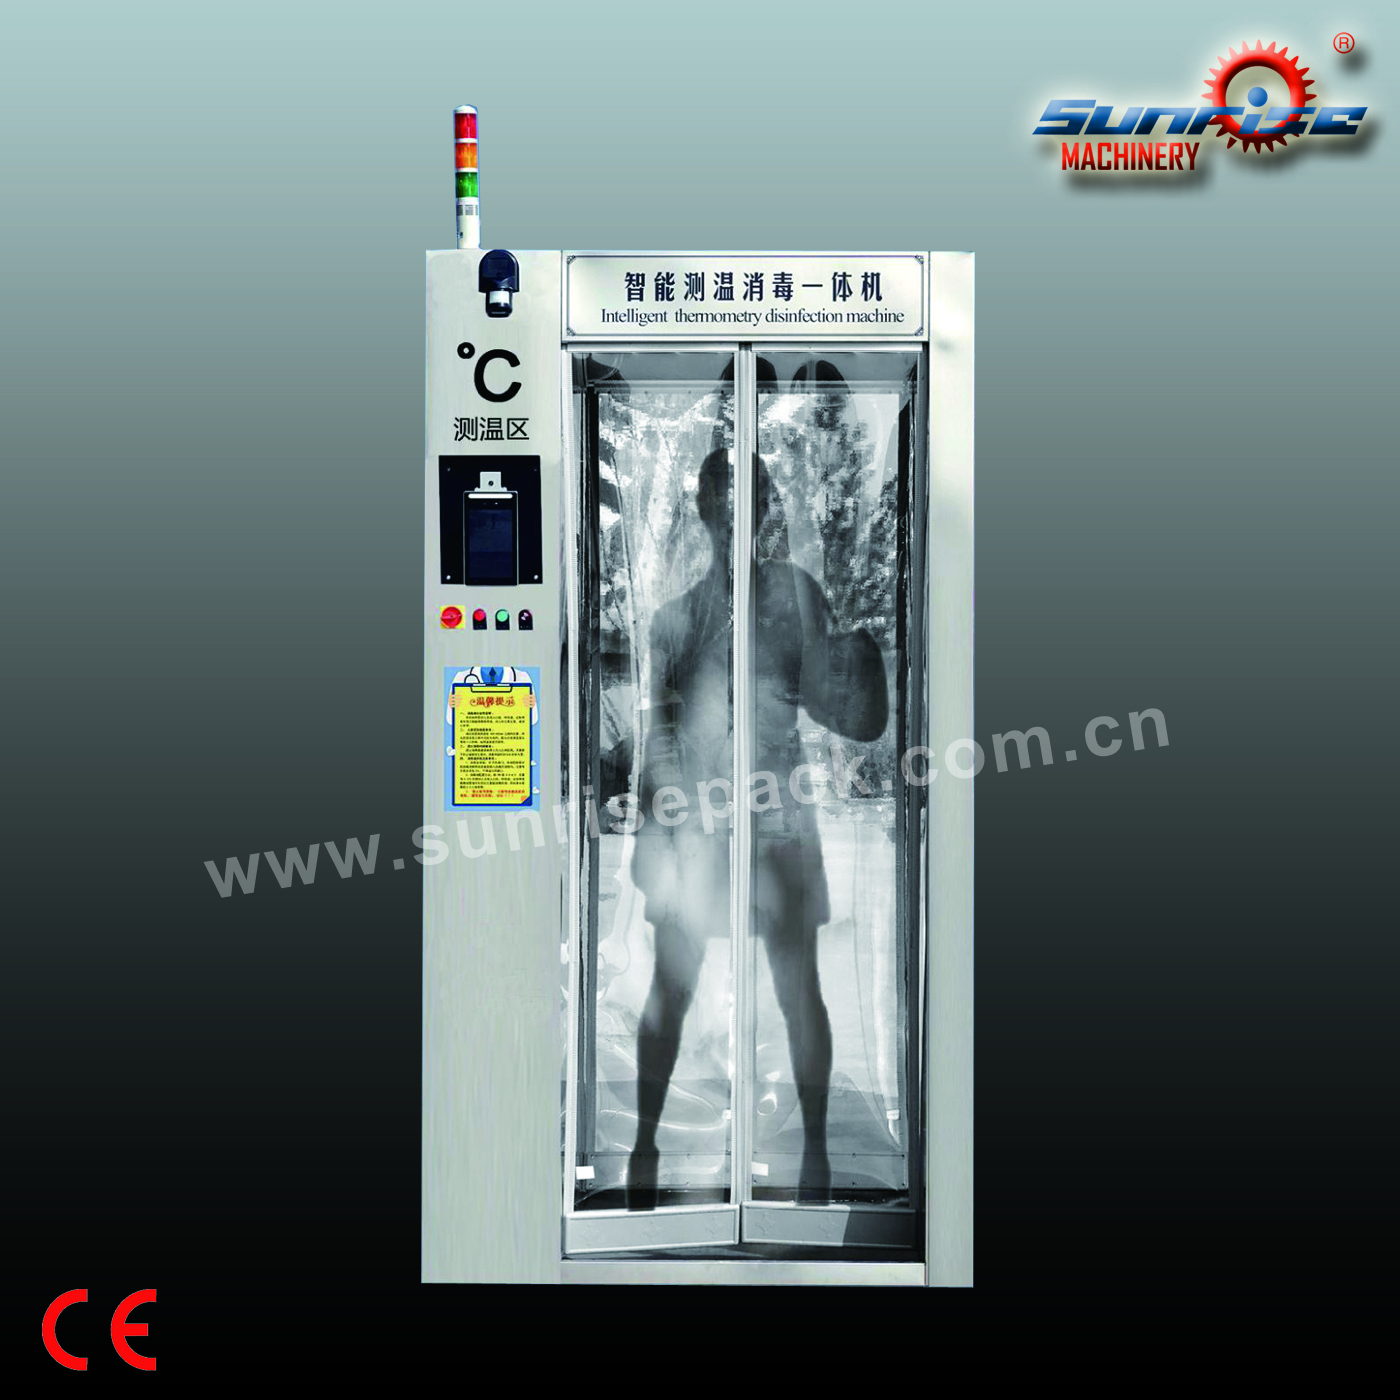 GZCD-1A Thermometry Disinfection Machine.jpg